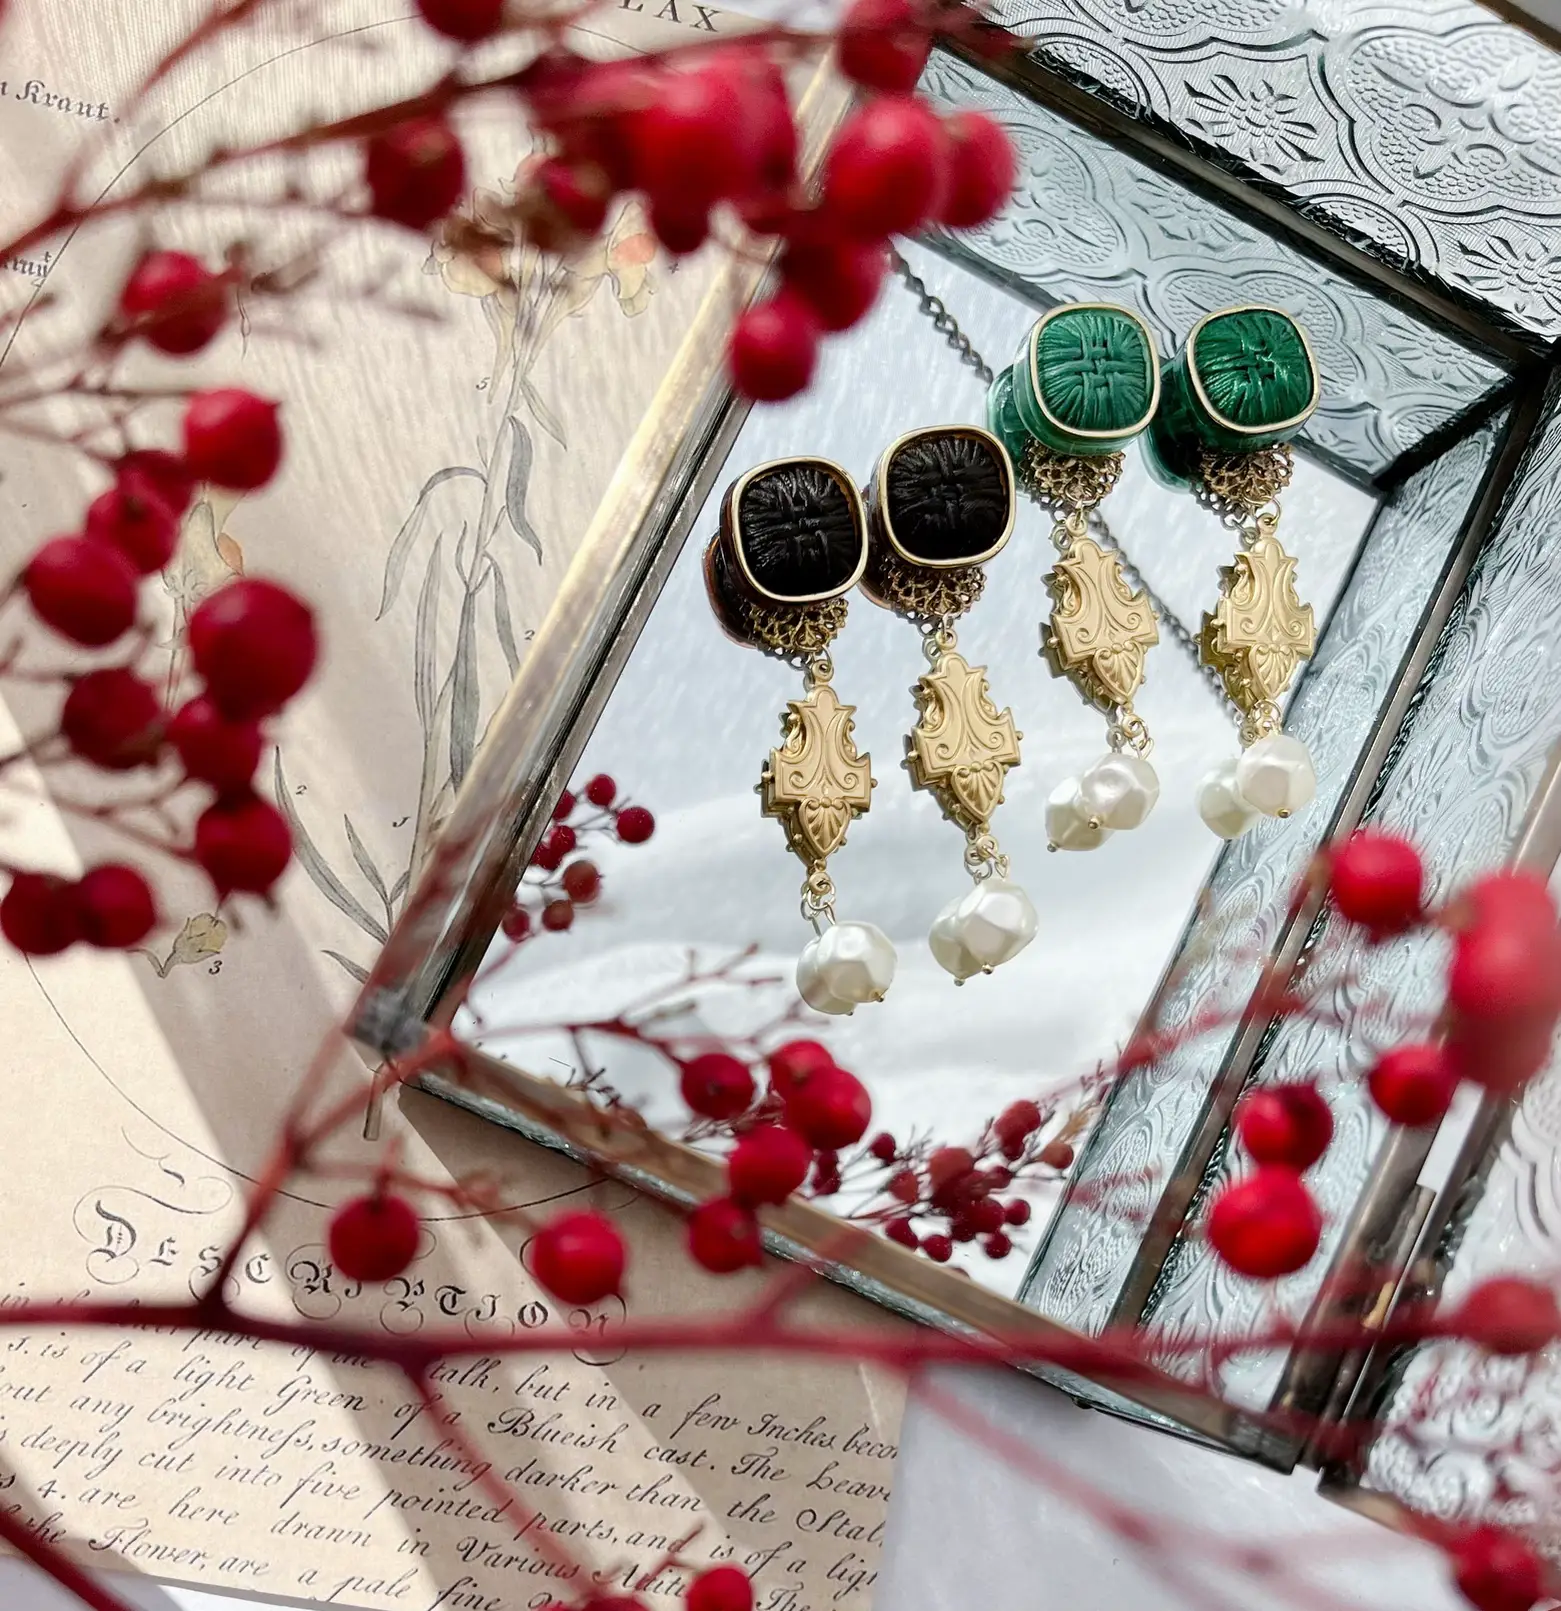 Decorative Fill Thread Button Earrings | Gallery posted by